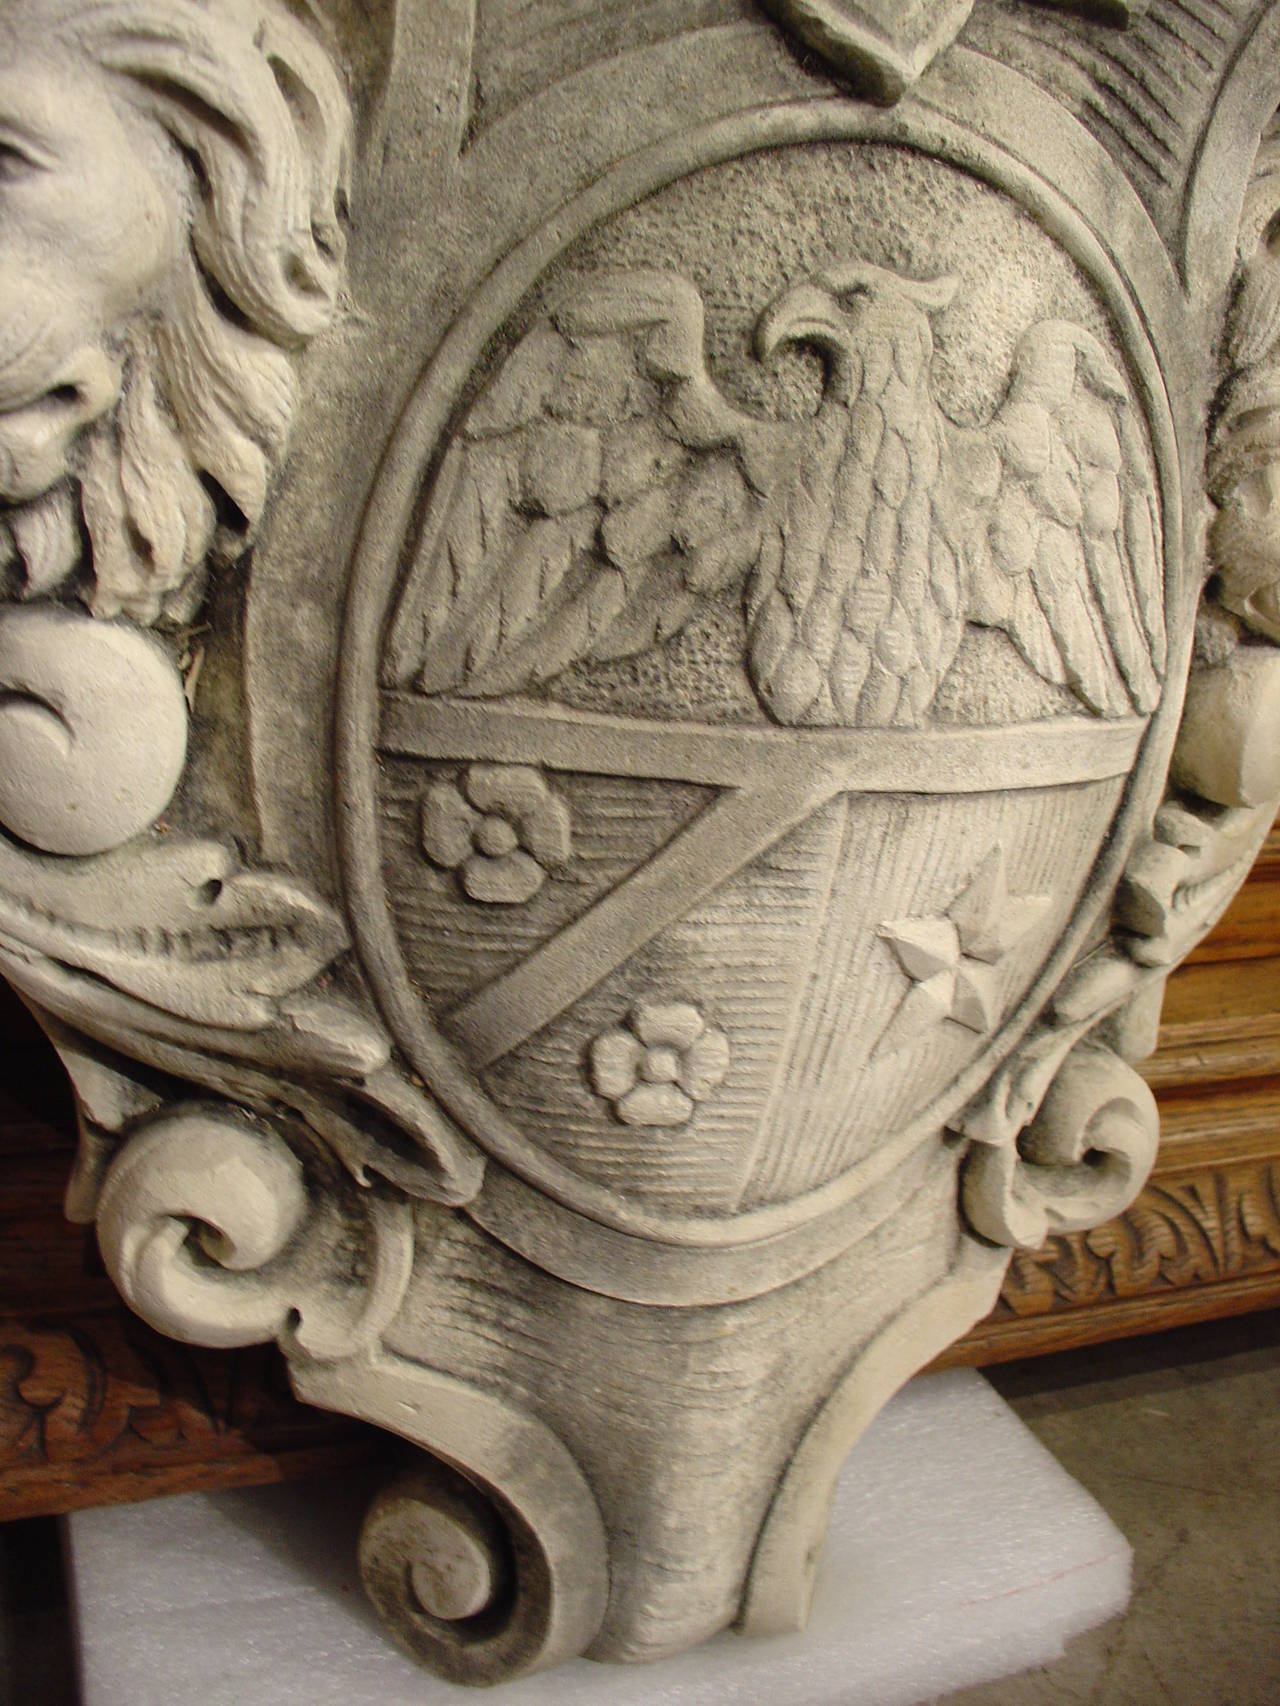 This Italian coat of arms made from limestone, has a wonderful aged patina from being outside.  There is a stylized crown at the top or crest area with a knight’s helmet beneath.  The shield is within an escutcheon shape featuring an eagle, a star